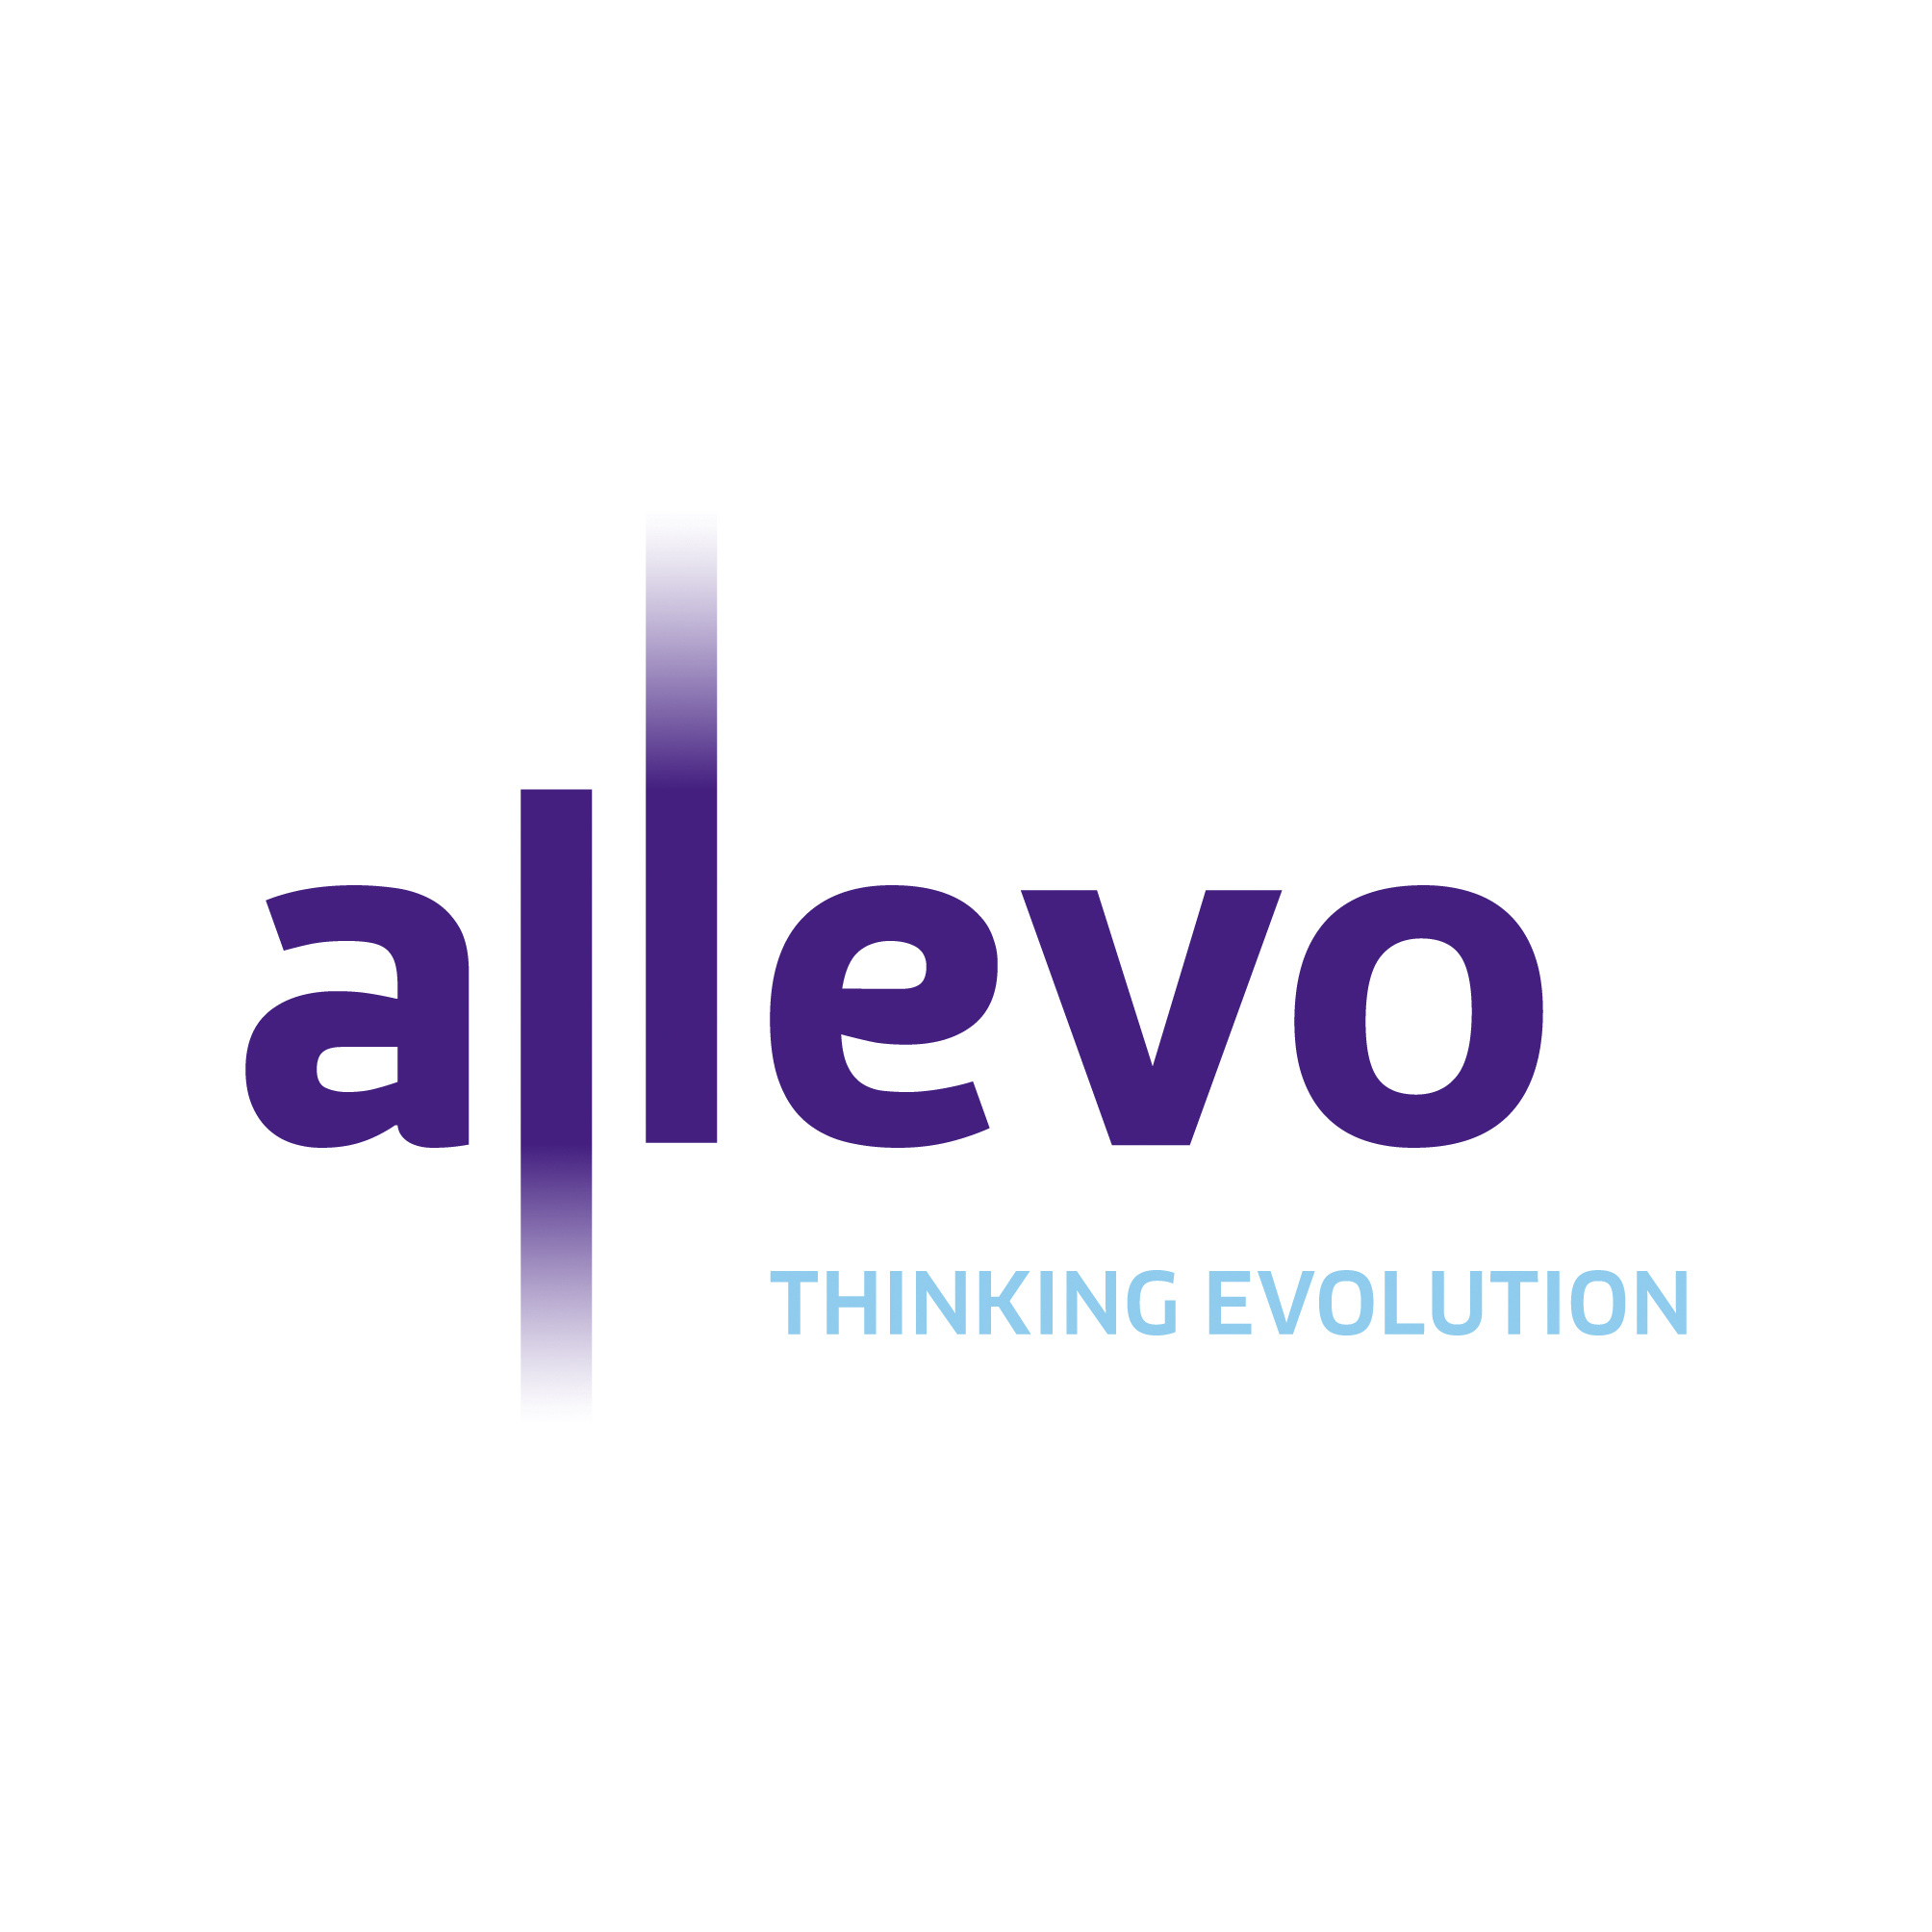 Allevo exhibits at Startup Grind Global Conference 2020 in Silicon Valley